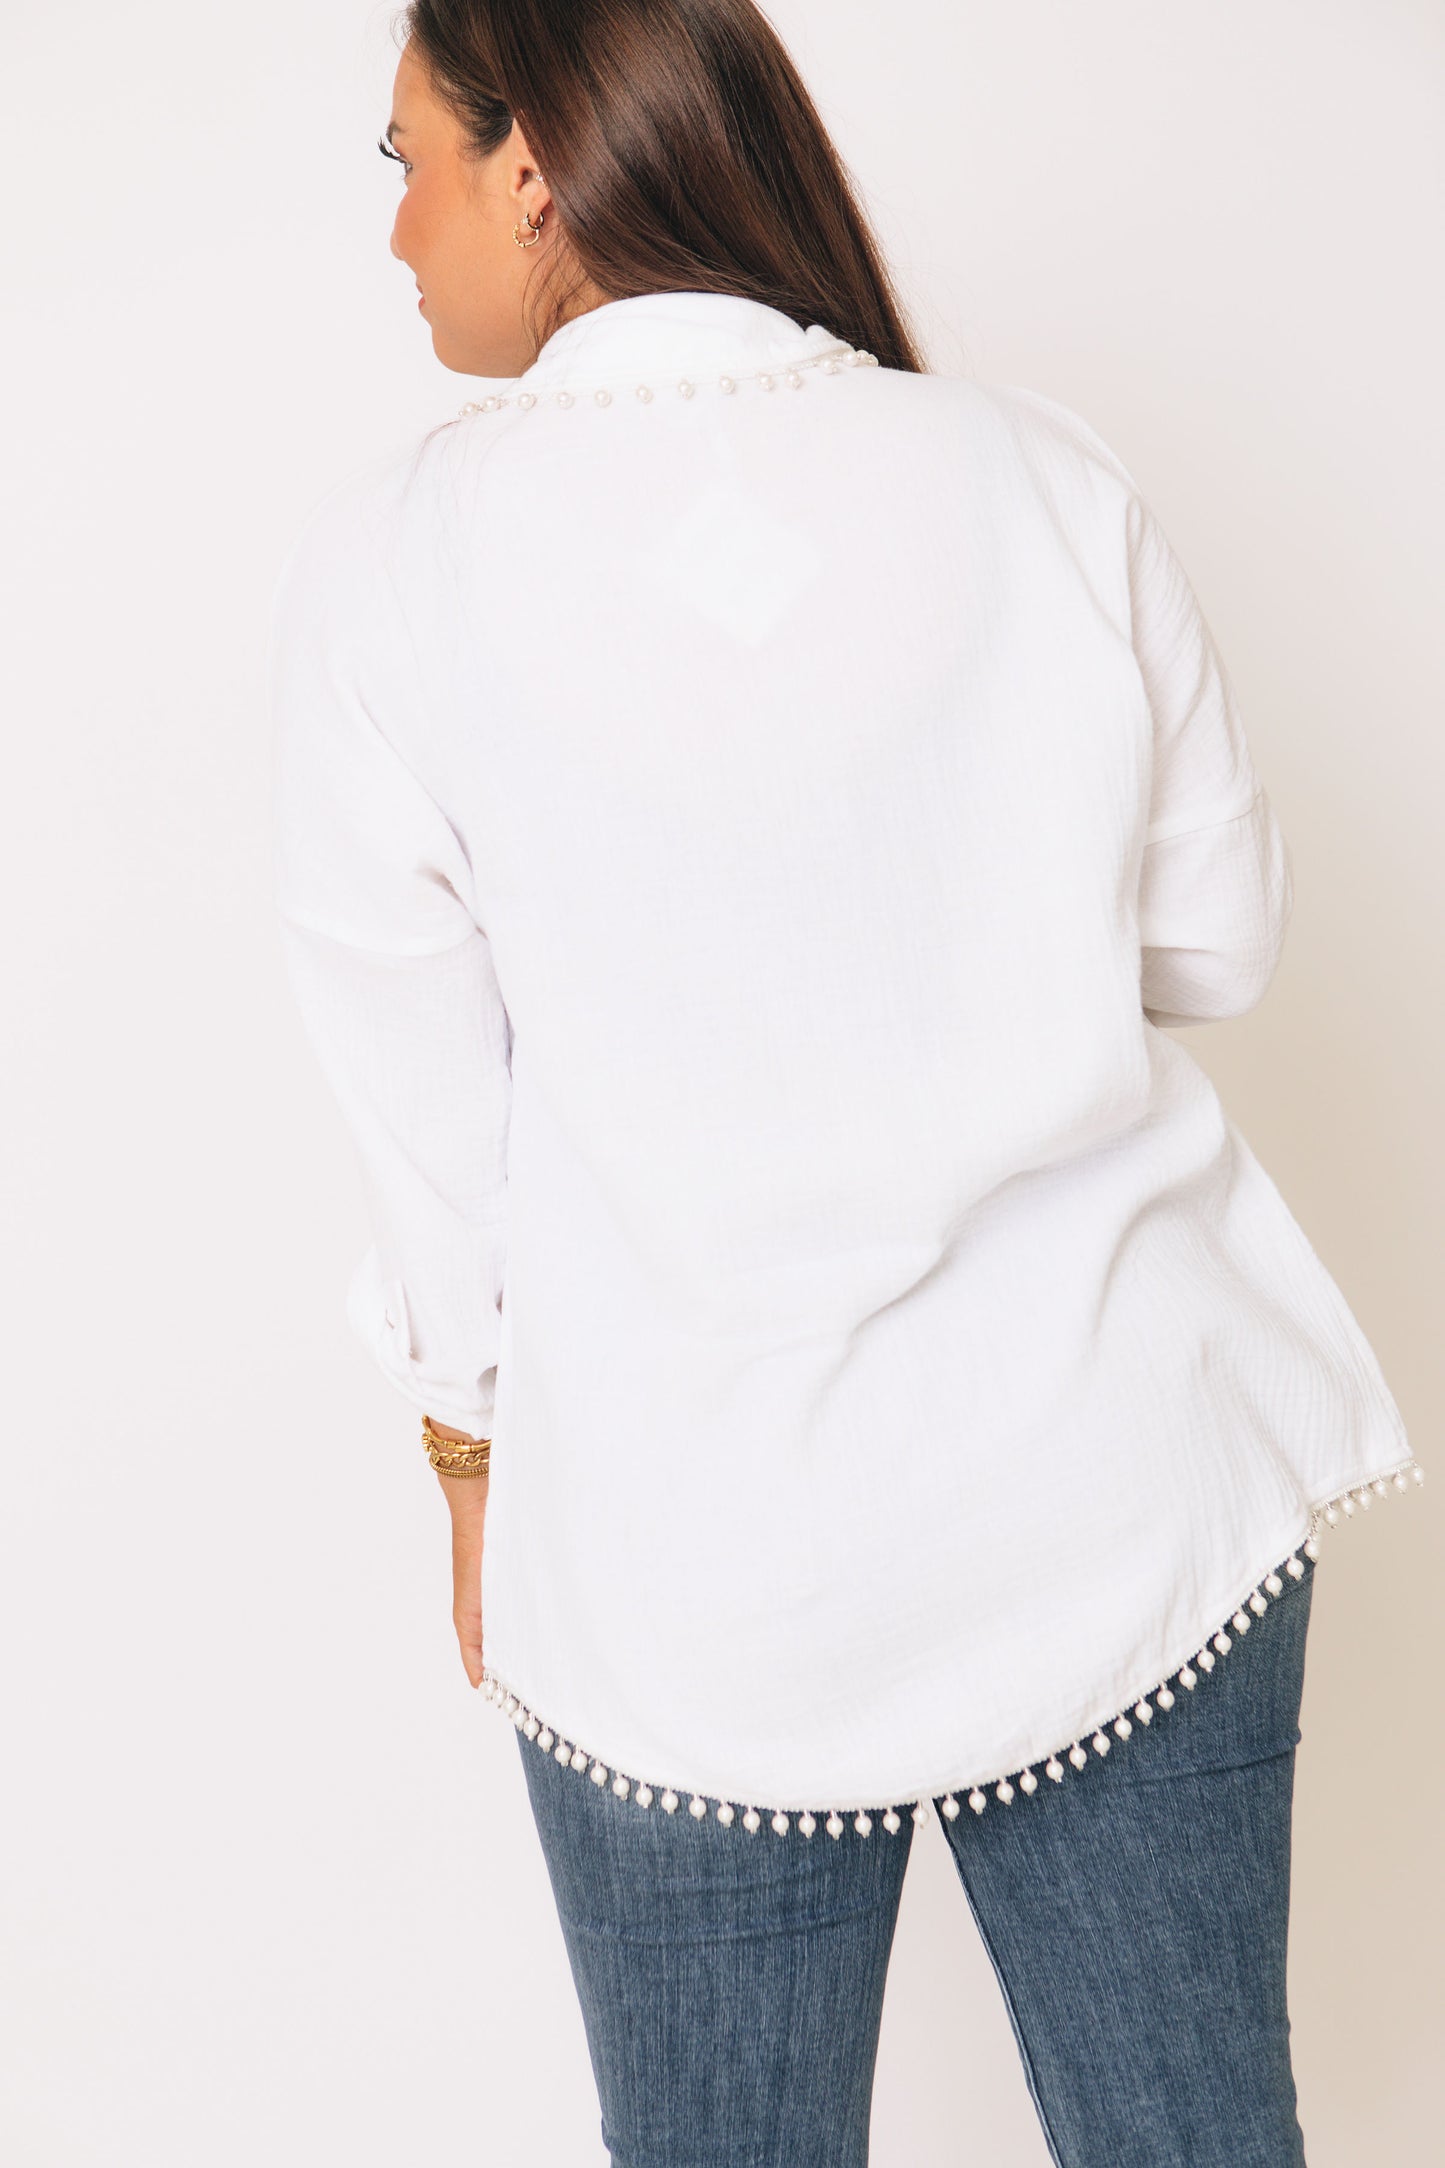 Pearl Embellishment With Hidden Button Up (S-3XL)